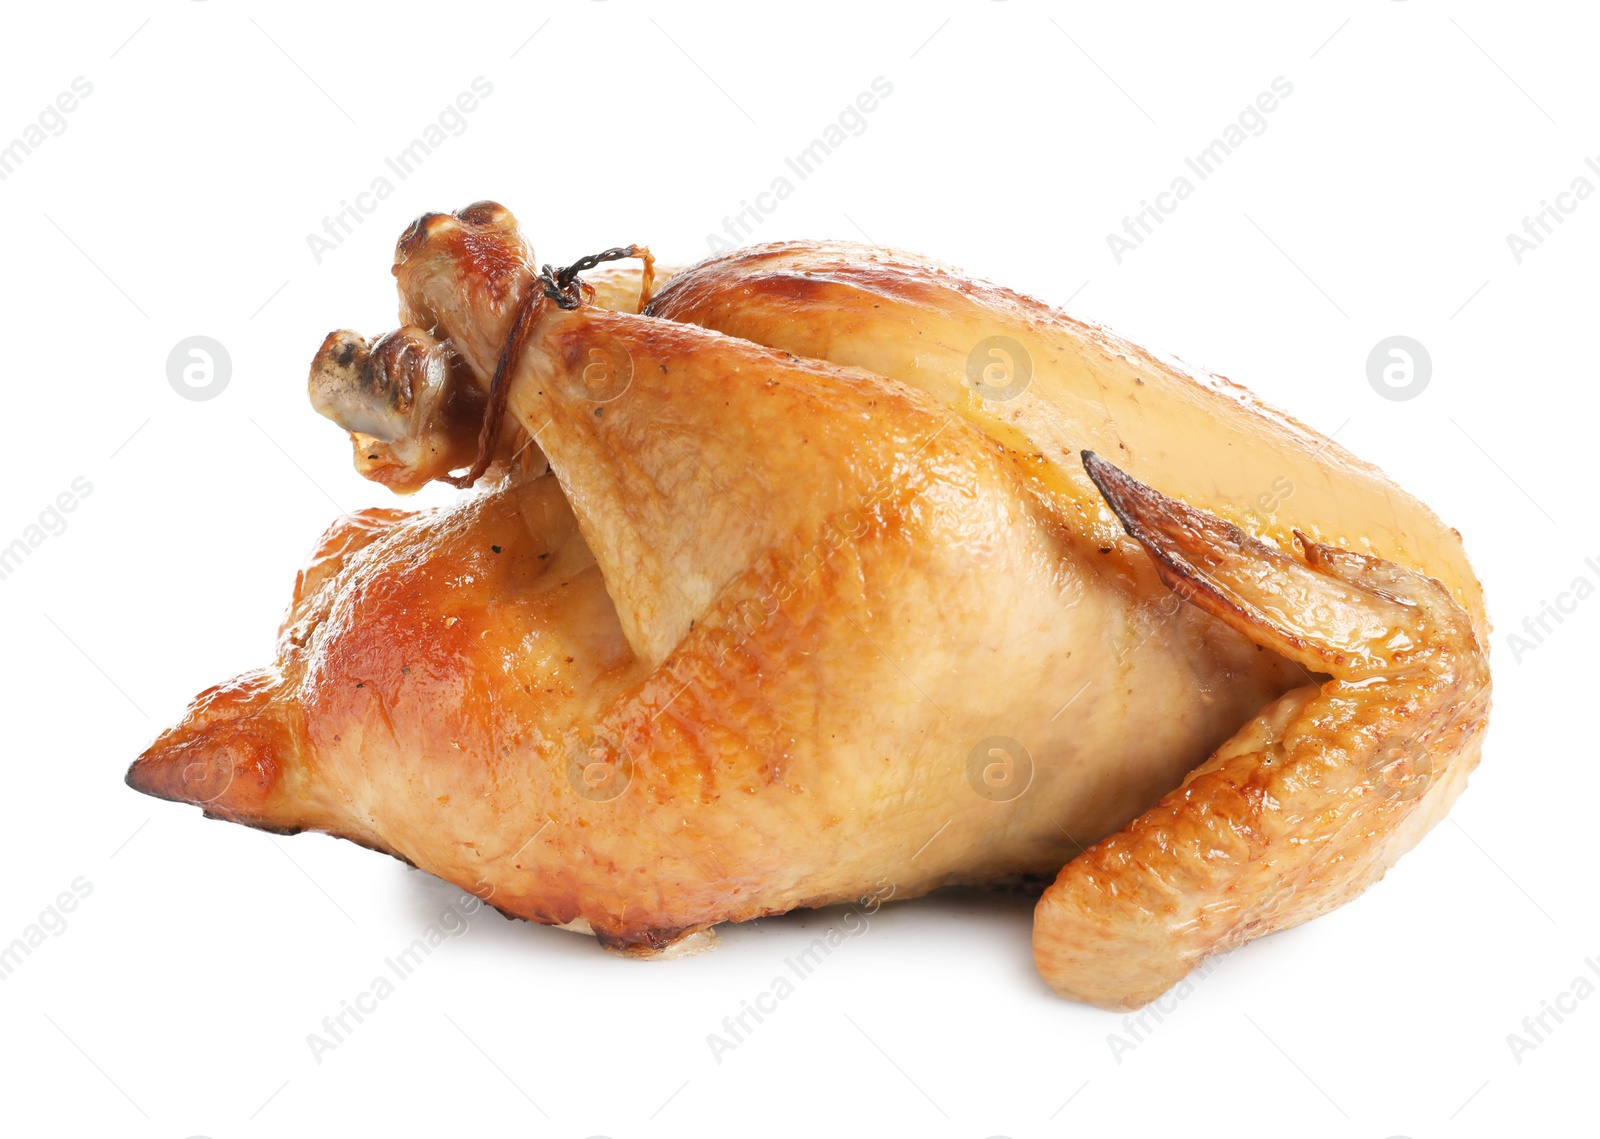 Photo of Delicious cooked whole turkey on white background